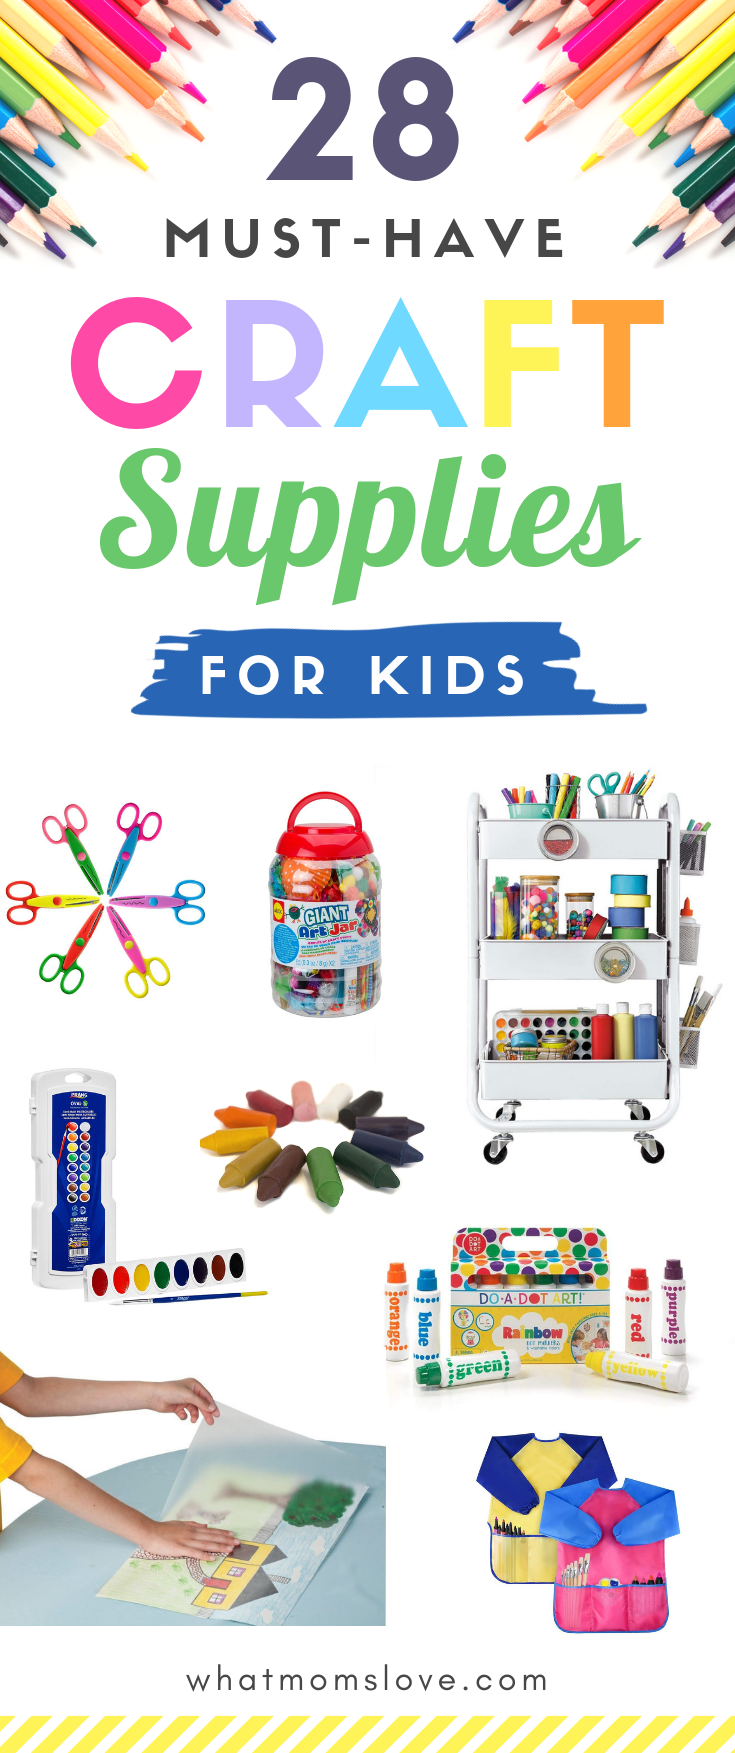 Must Have Craft Supplies for kids